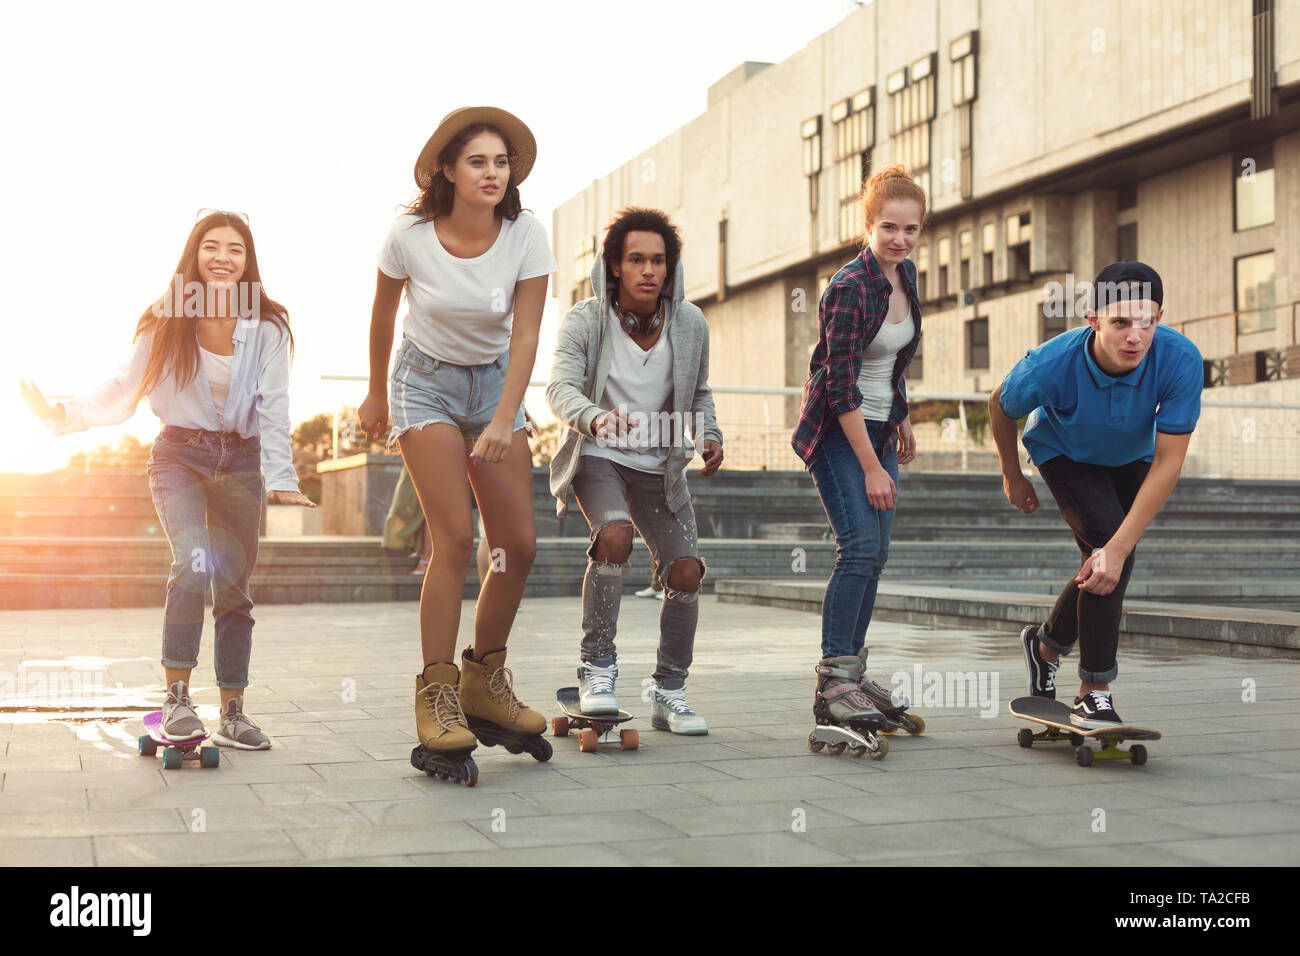 Group of teens making activities in urban area Stock Photo